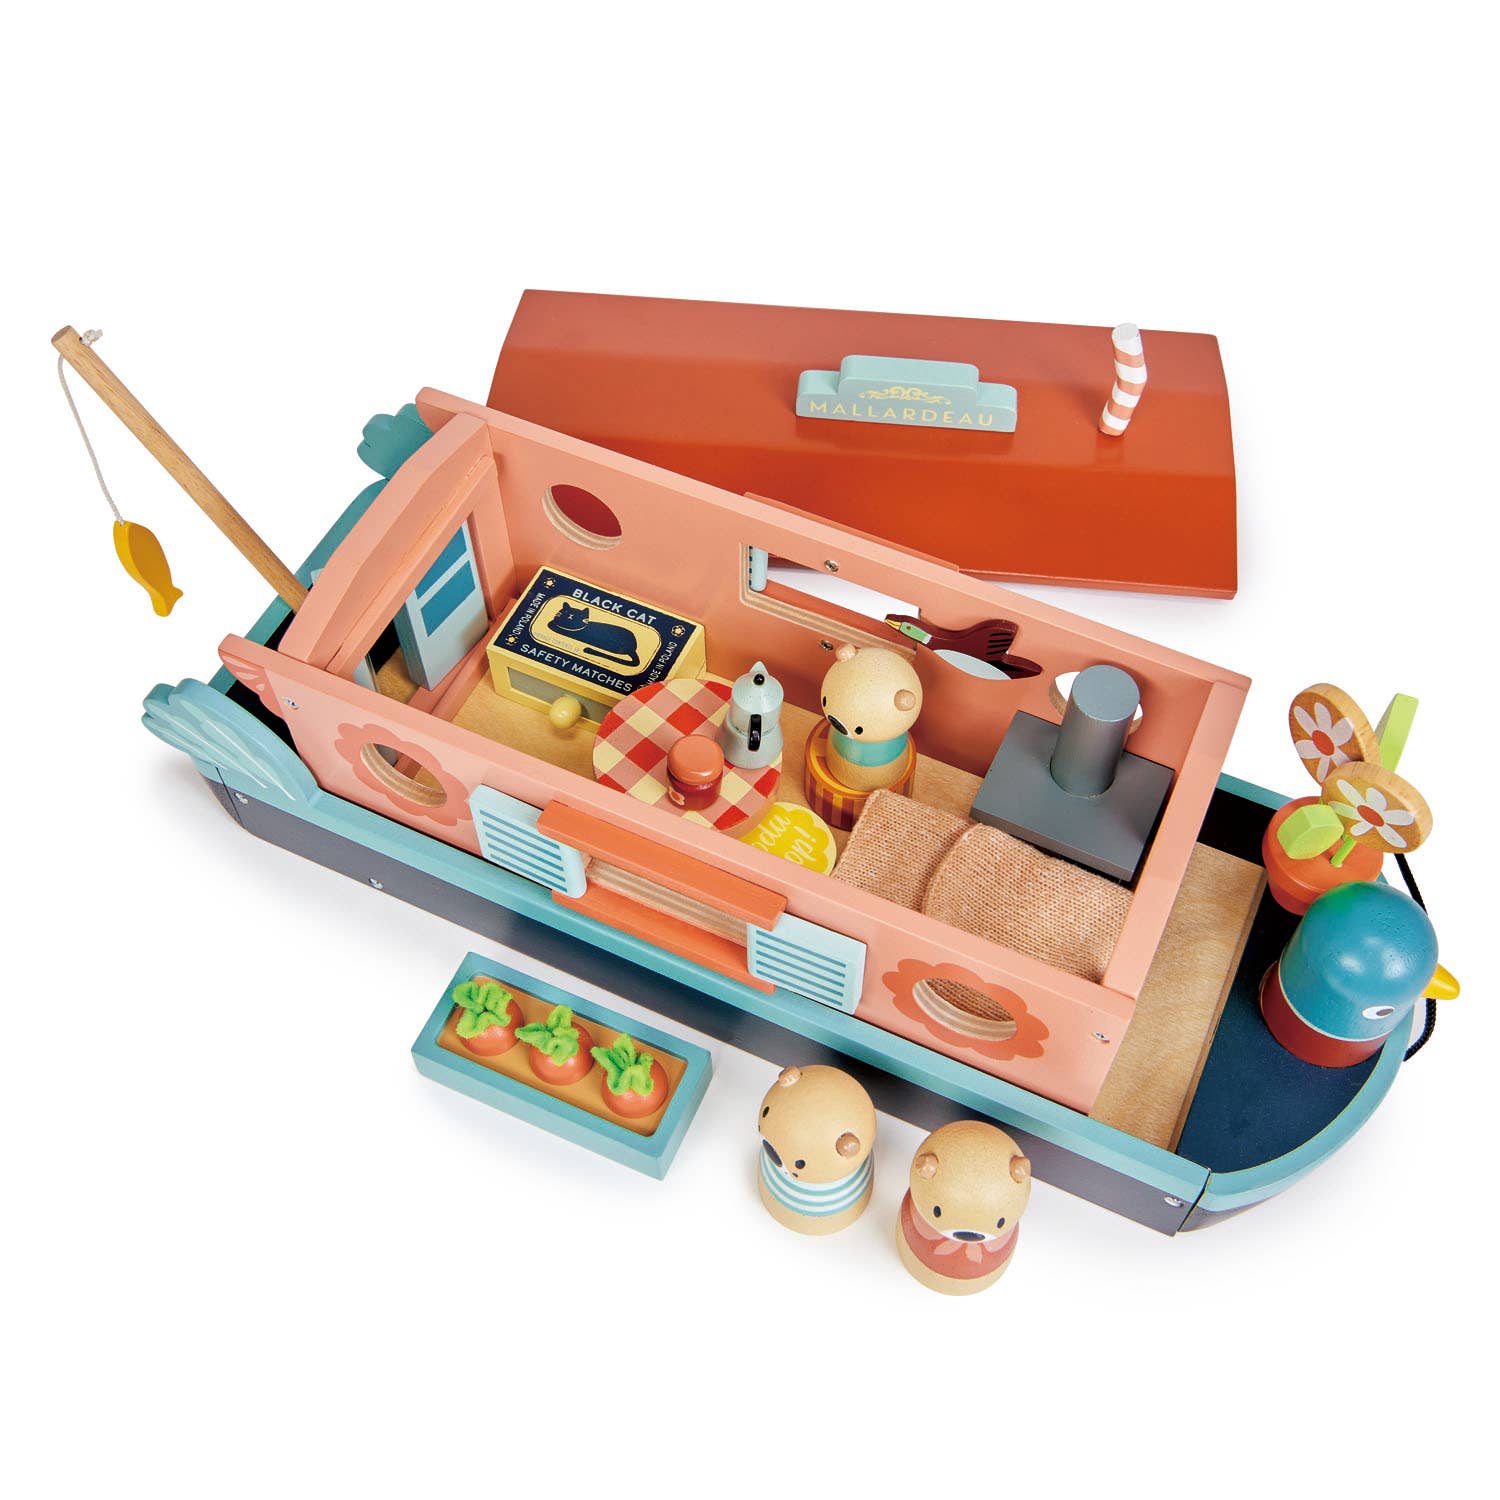 Little Otter Canal Boat, Introducing the Little Otter Canal Boat, where our adorable wooden otter doll family resides. This beautiful canal boat, named "Malardeau" after their favorite mallard duck, is a delightful addition to our wooden toy range.The removable roof and lift-out cabin provide extra play space and make this doll's house boat perfect for imaginative playtime. The Little Otter Canal Boat set also includes a variety of accessories designed to support language development, emotional awareness, a